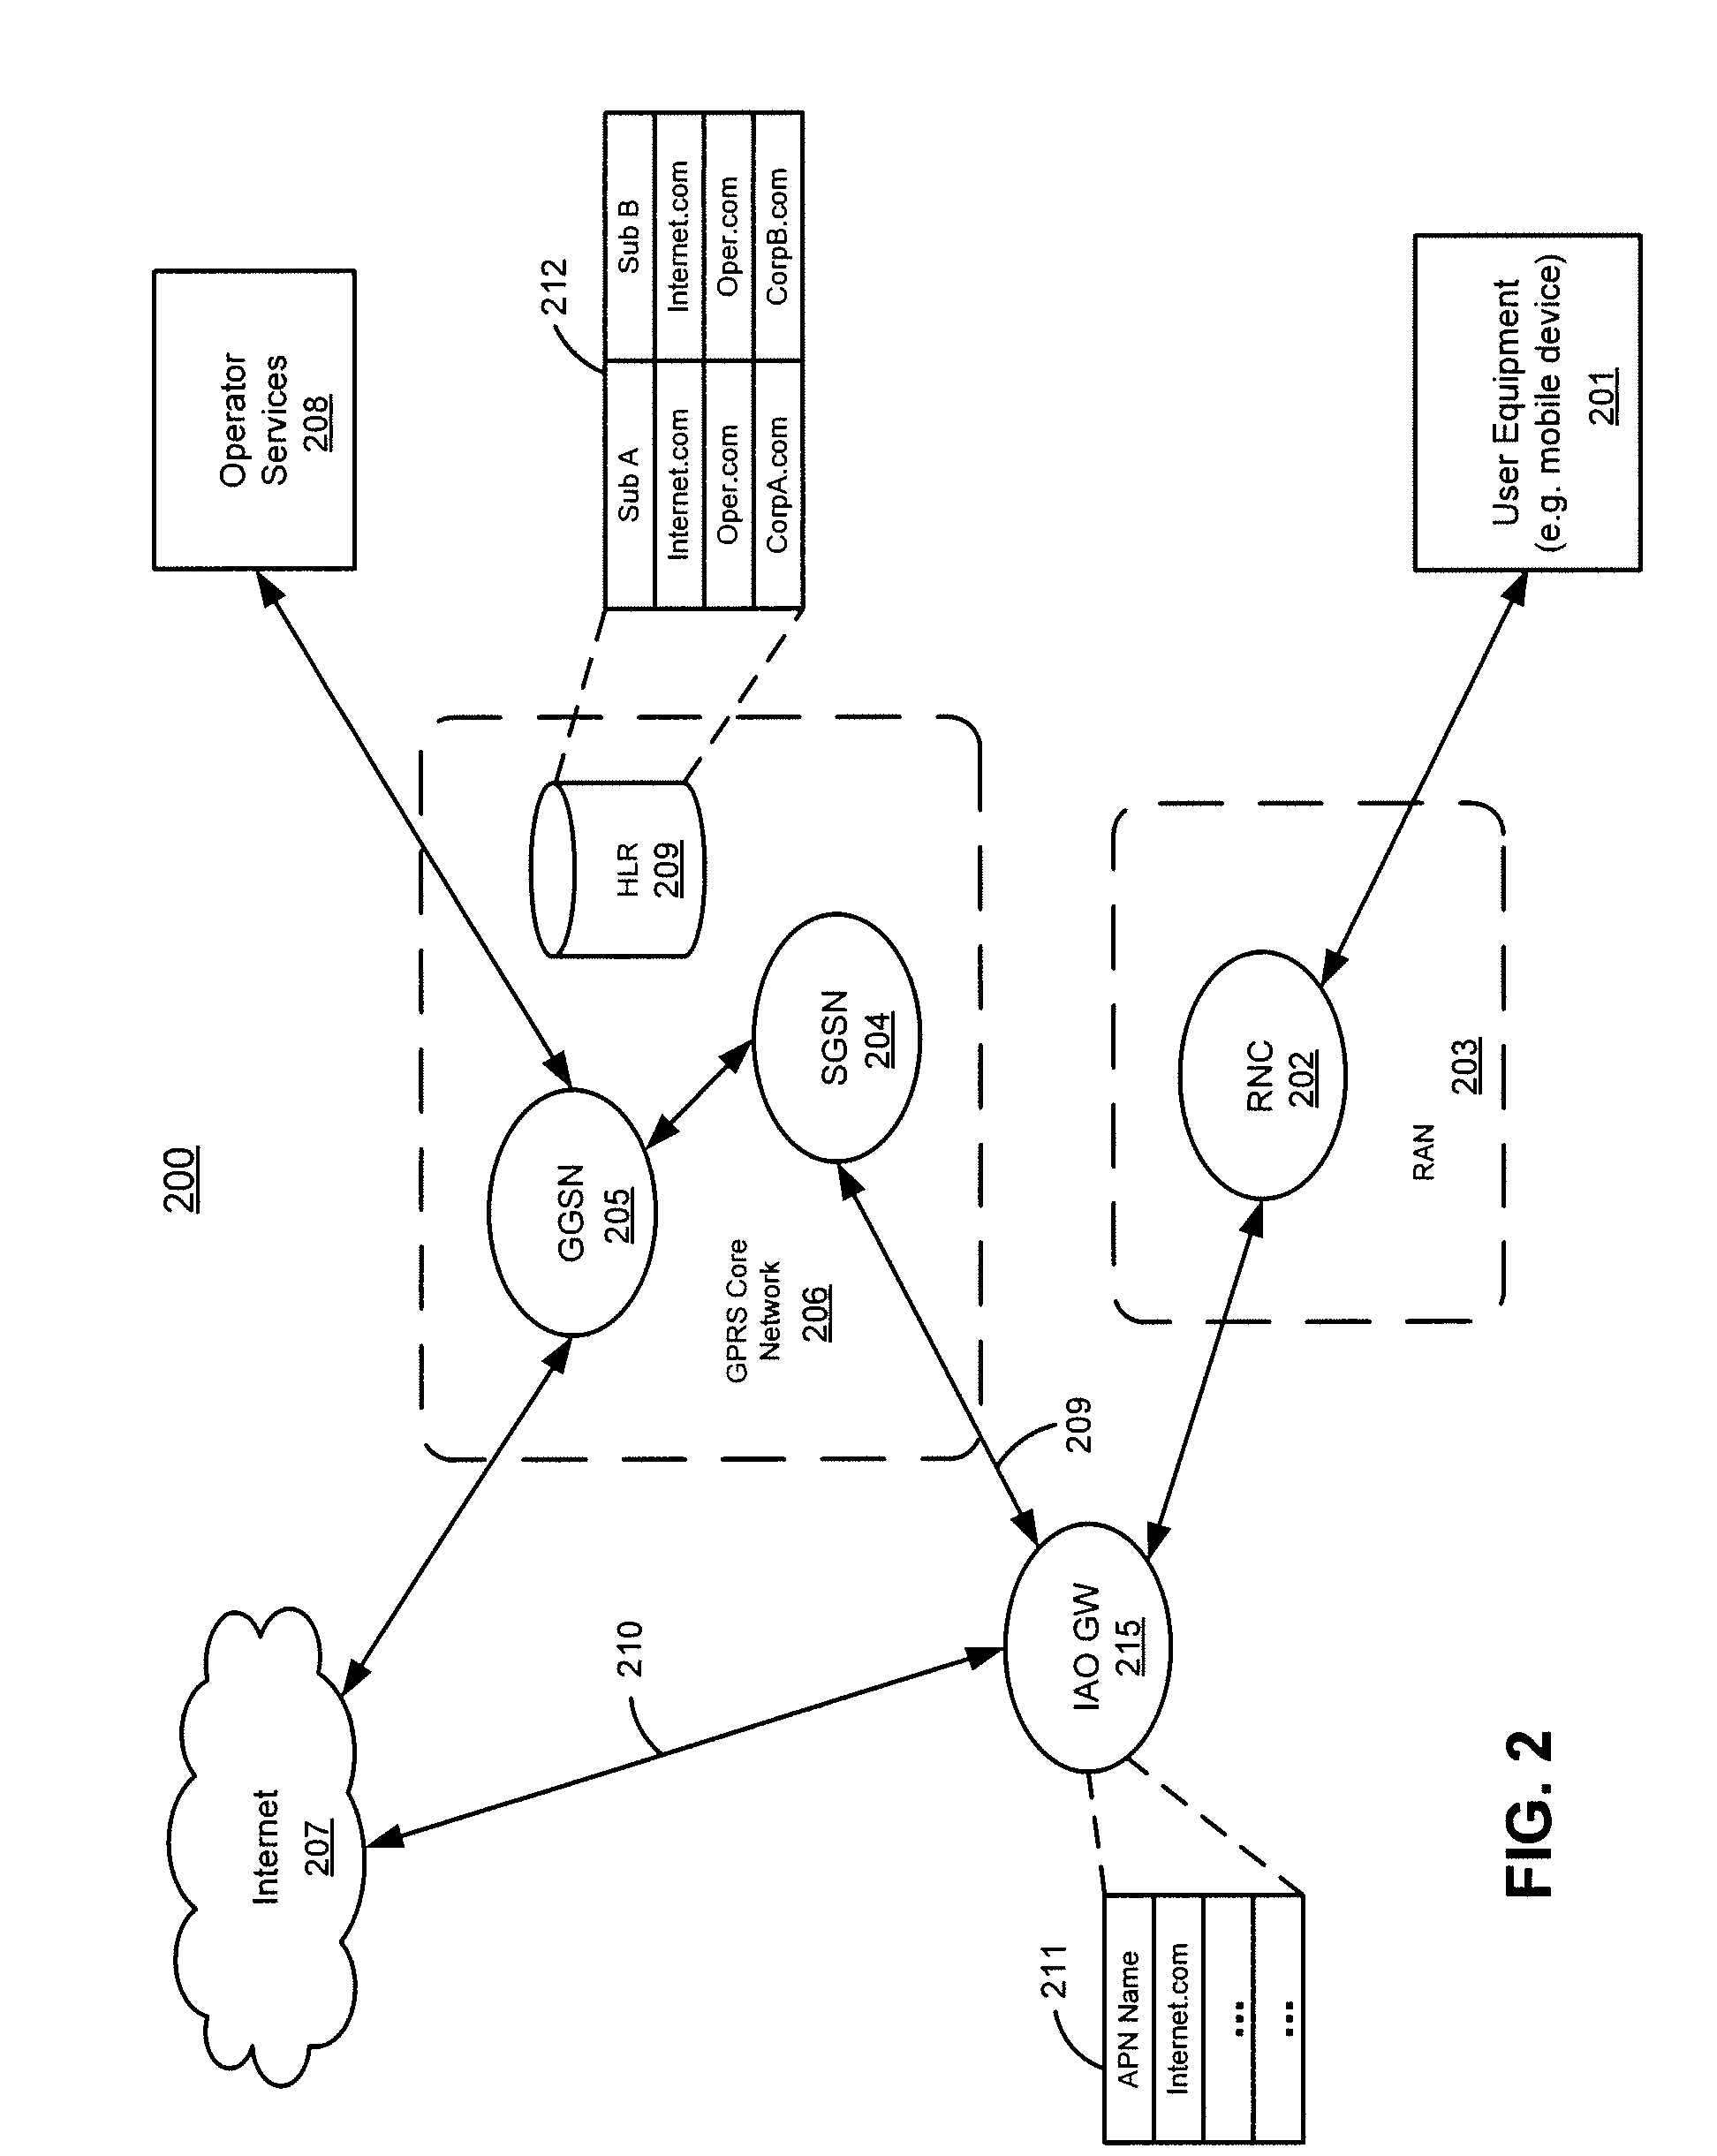 Method and system for bypassing 3GPP packet switched core network when accessing internet from 3GPP UES using 3GPP radio access network